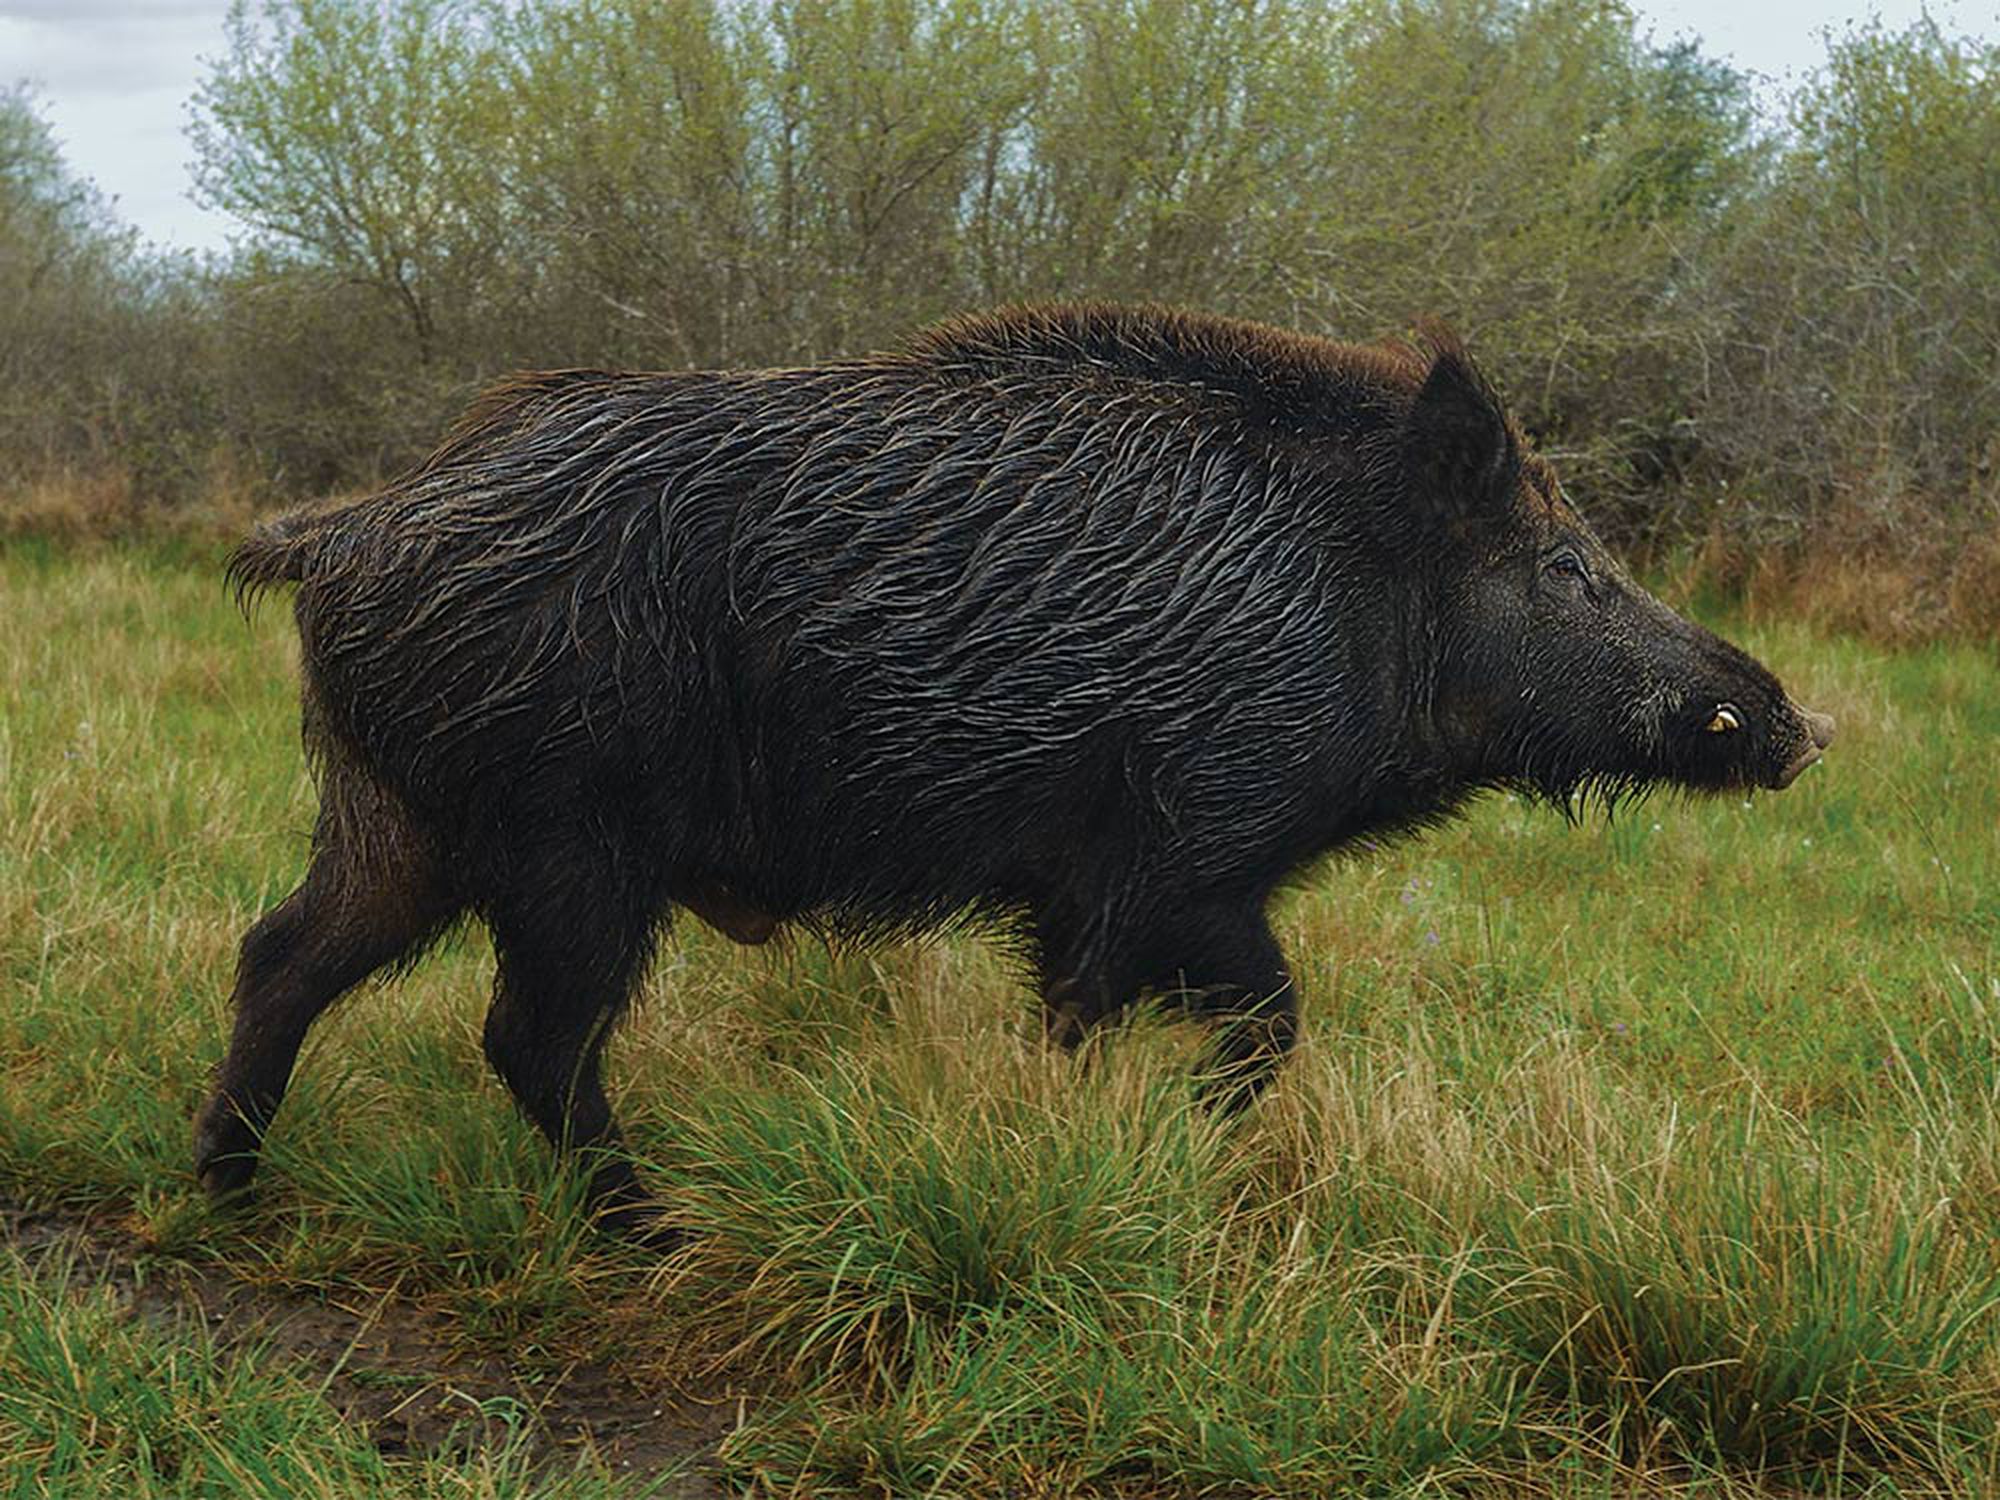 Big hogs are savvy hogs. They move most on the edges of daylight.